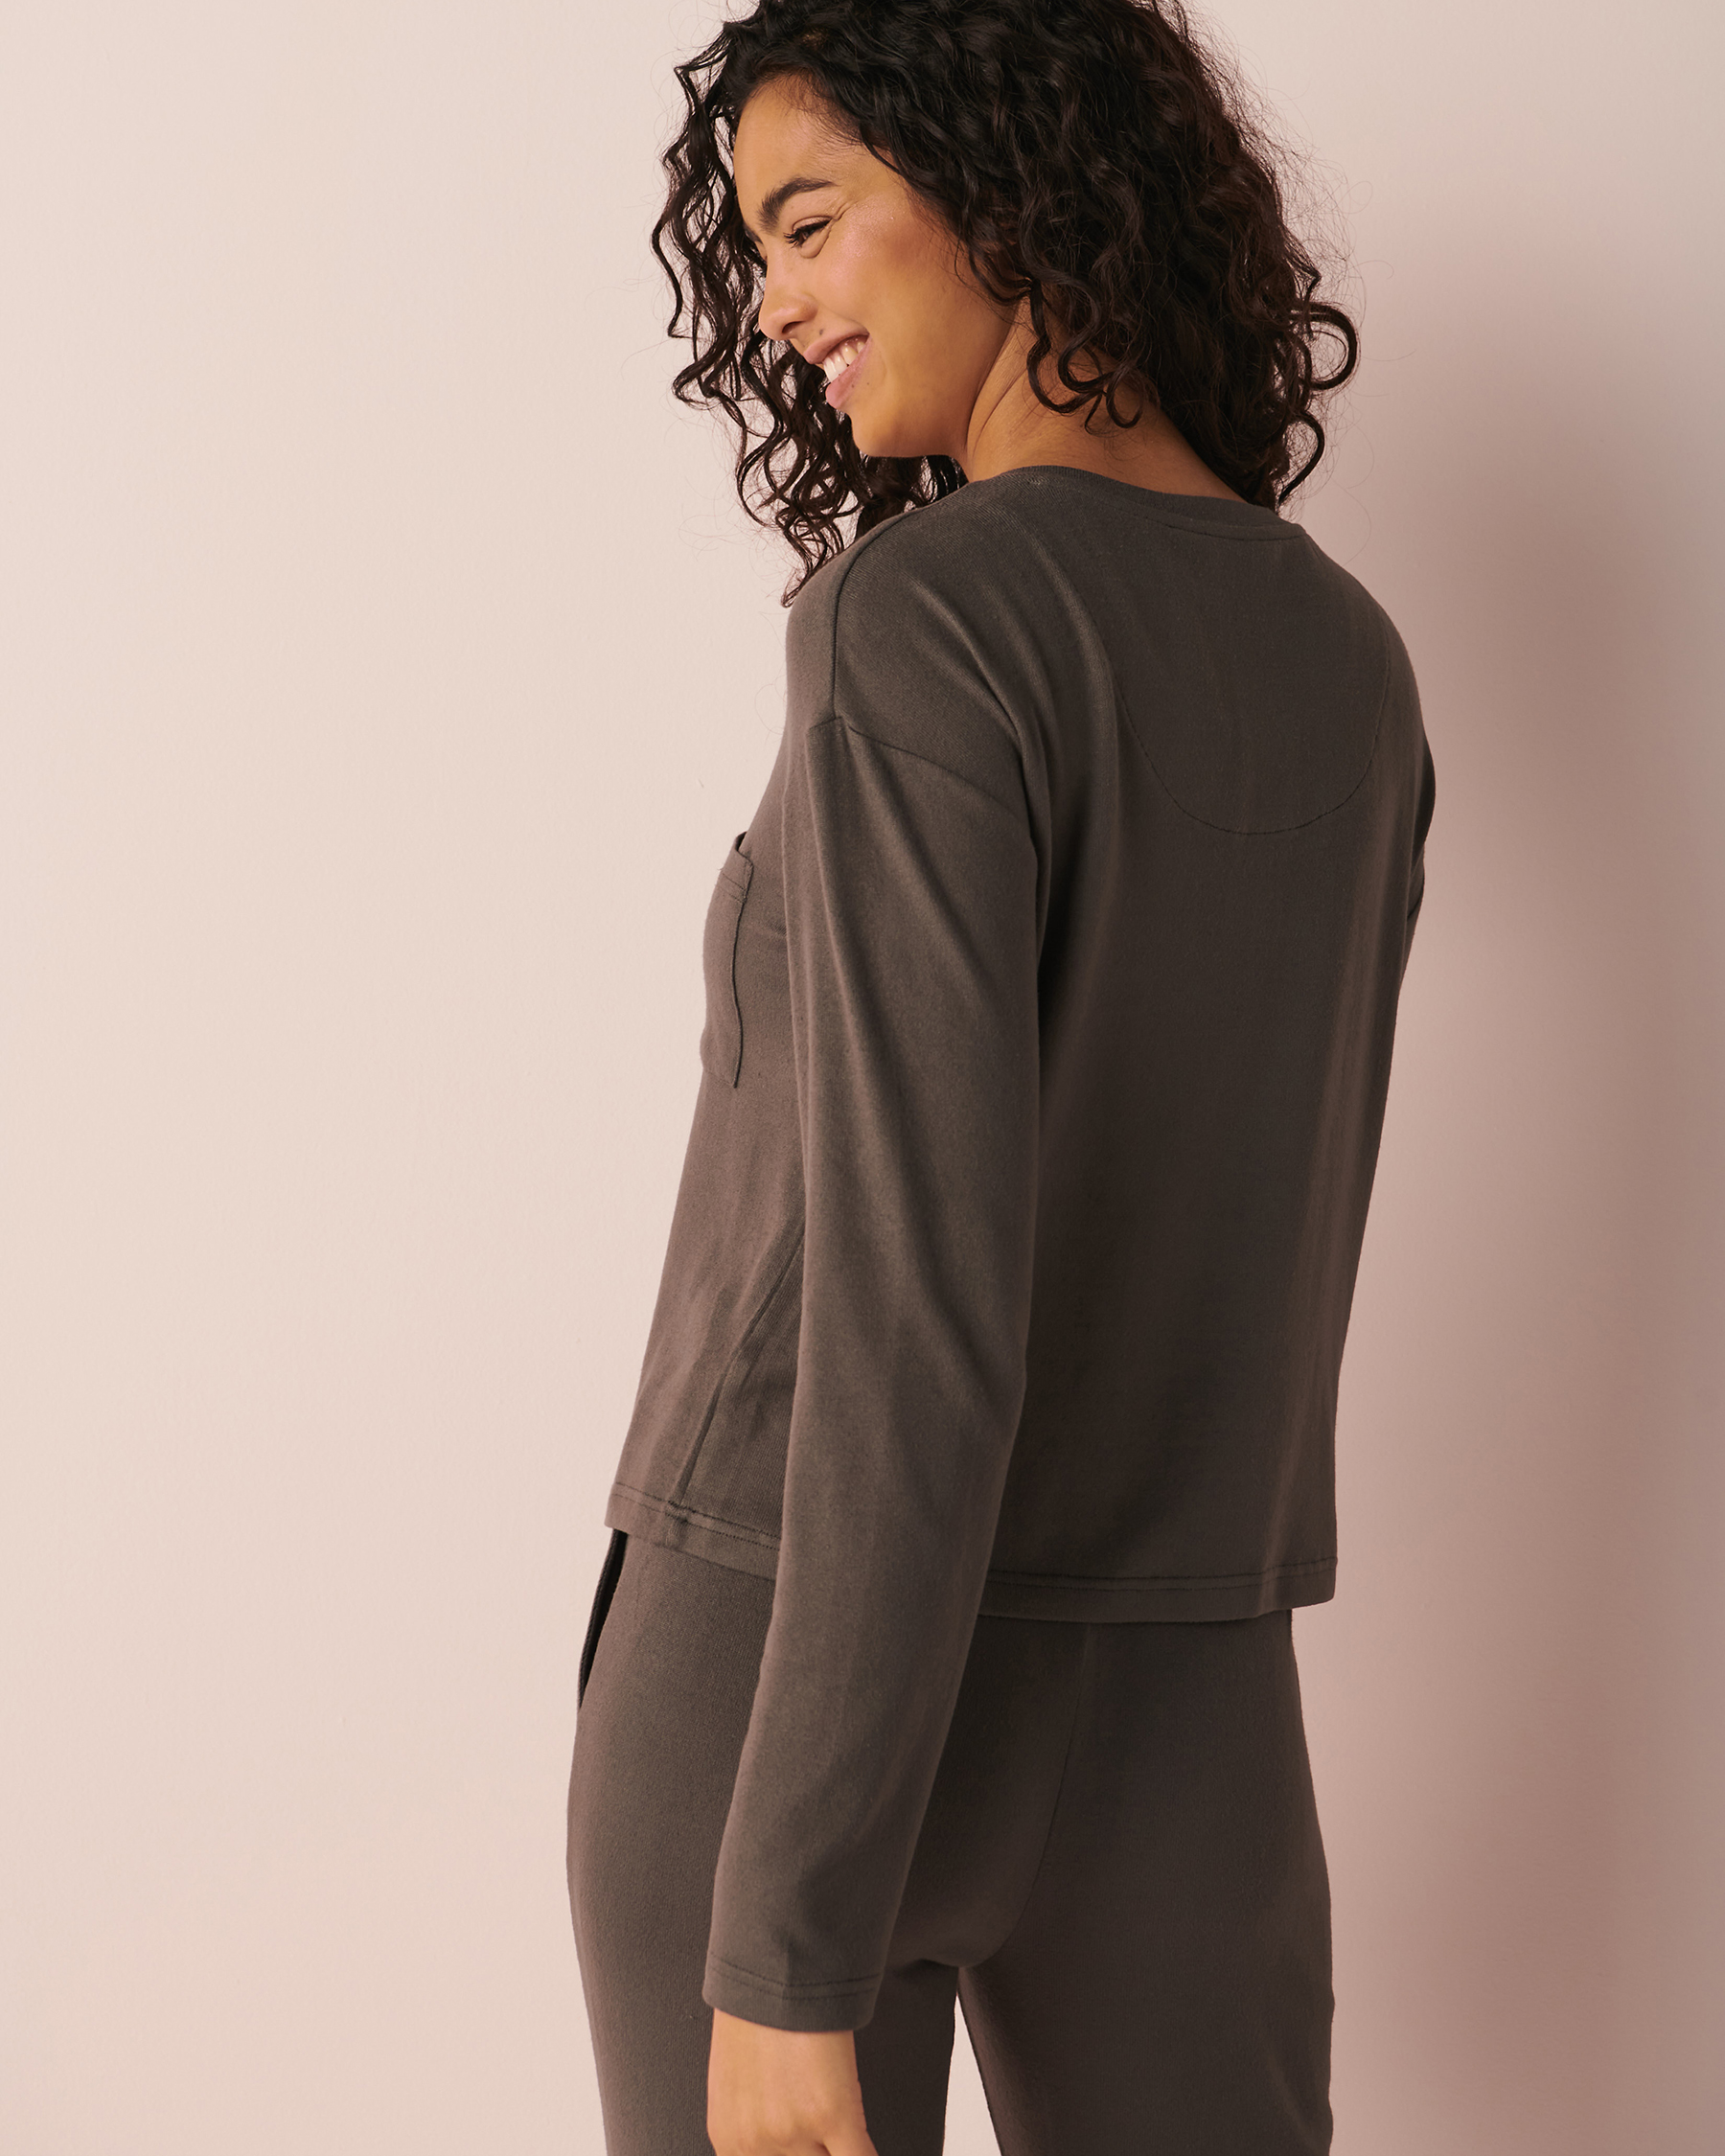 LA VIE EN ROSE Recycled Fibers Long Sleeve Shirt with Buttons Grey smoke 40100392 - View2